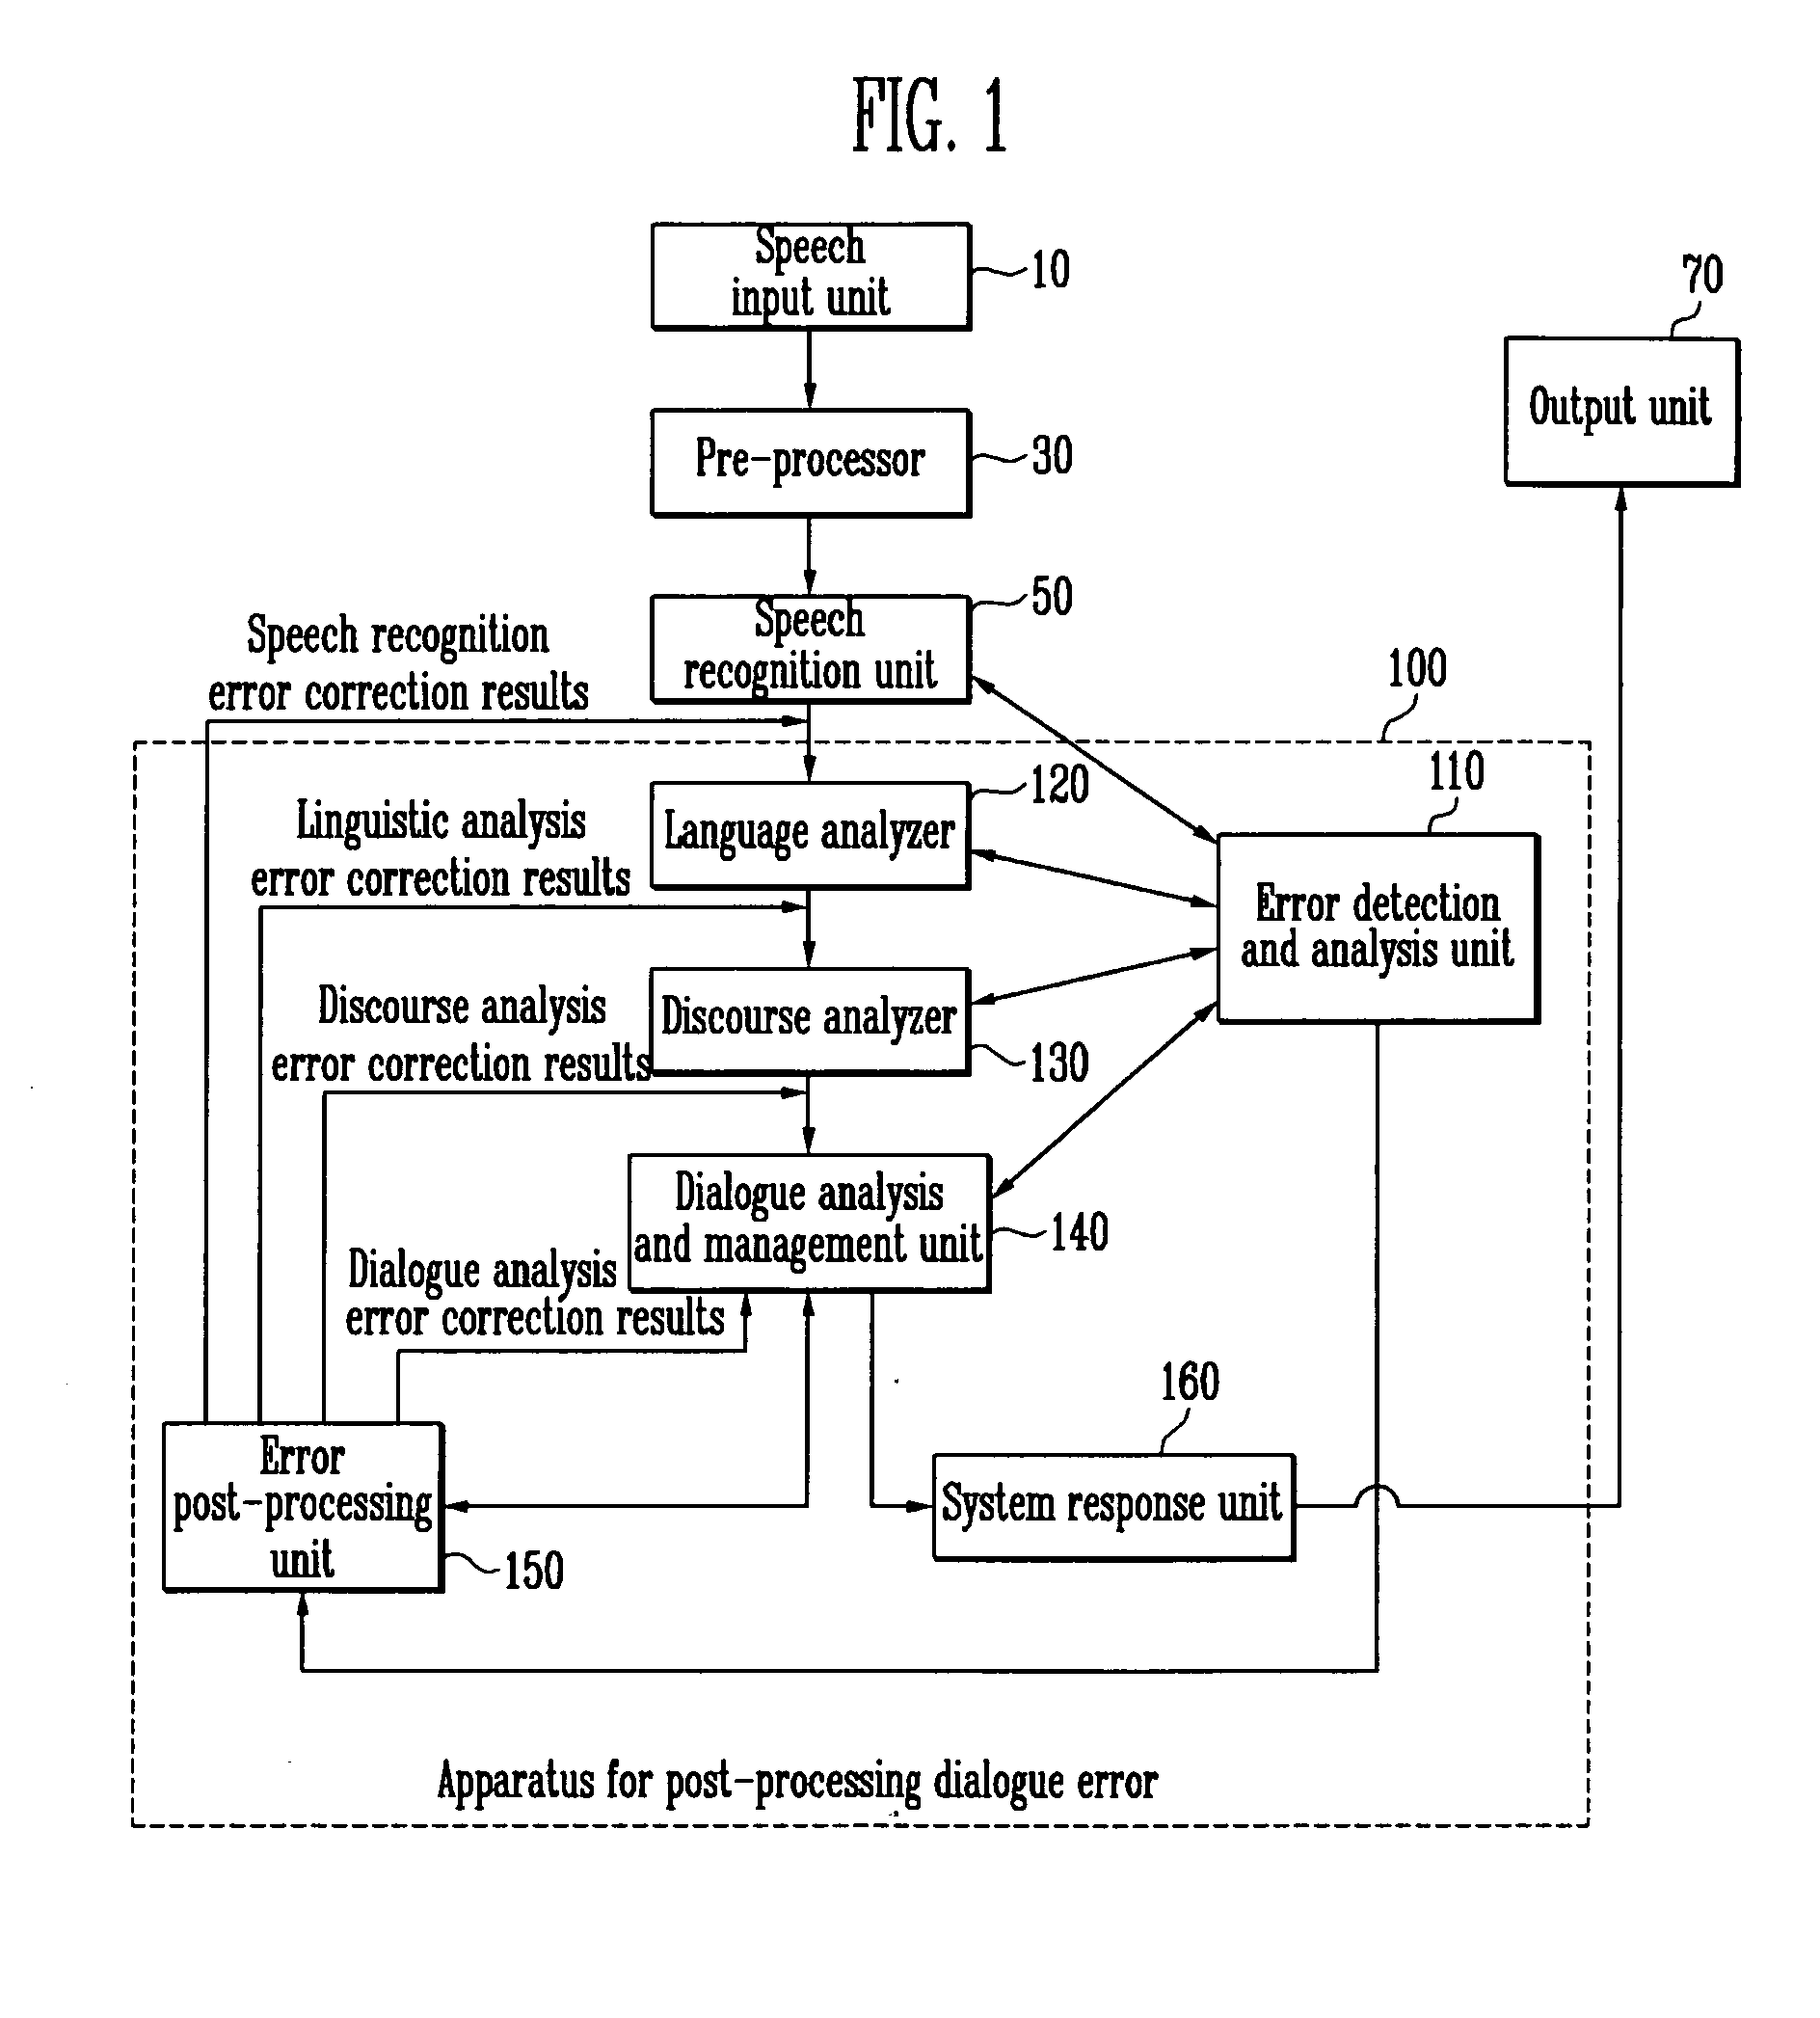 Apparatus and method for post-processing dialogue error in speech dialogue system using multilevel verification